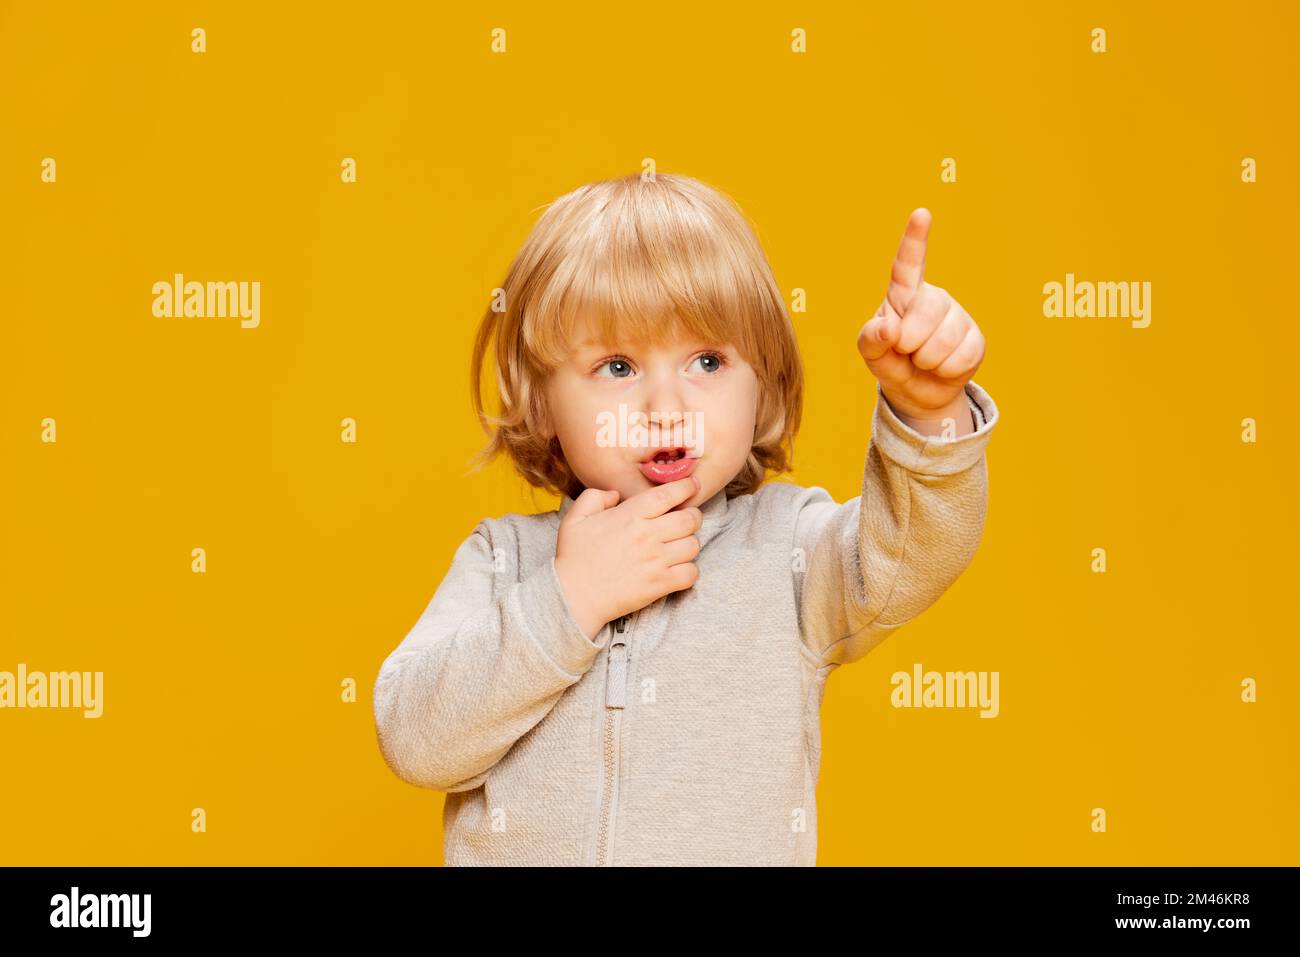 Portrait of cute little boy, child posing, pointing somewhere over yellow studio background. Curious kid. Concept of childhood, emotions Stock Photo